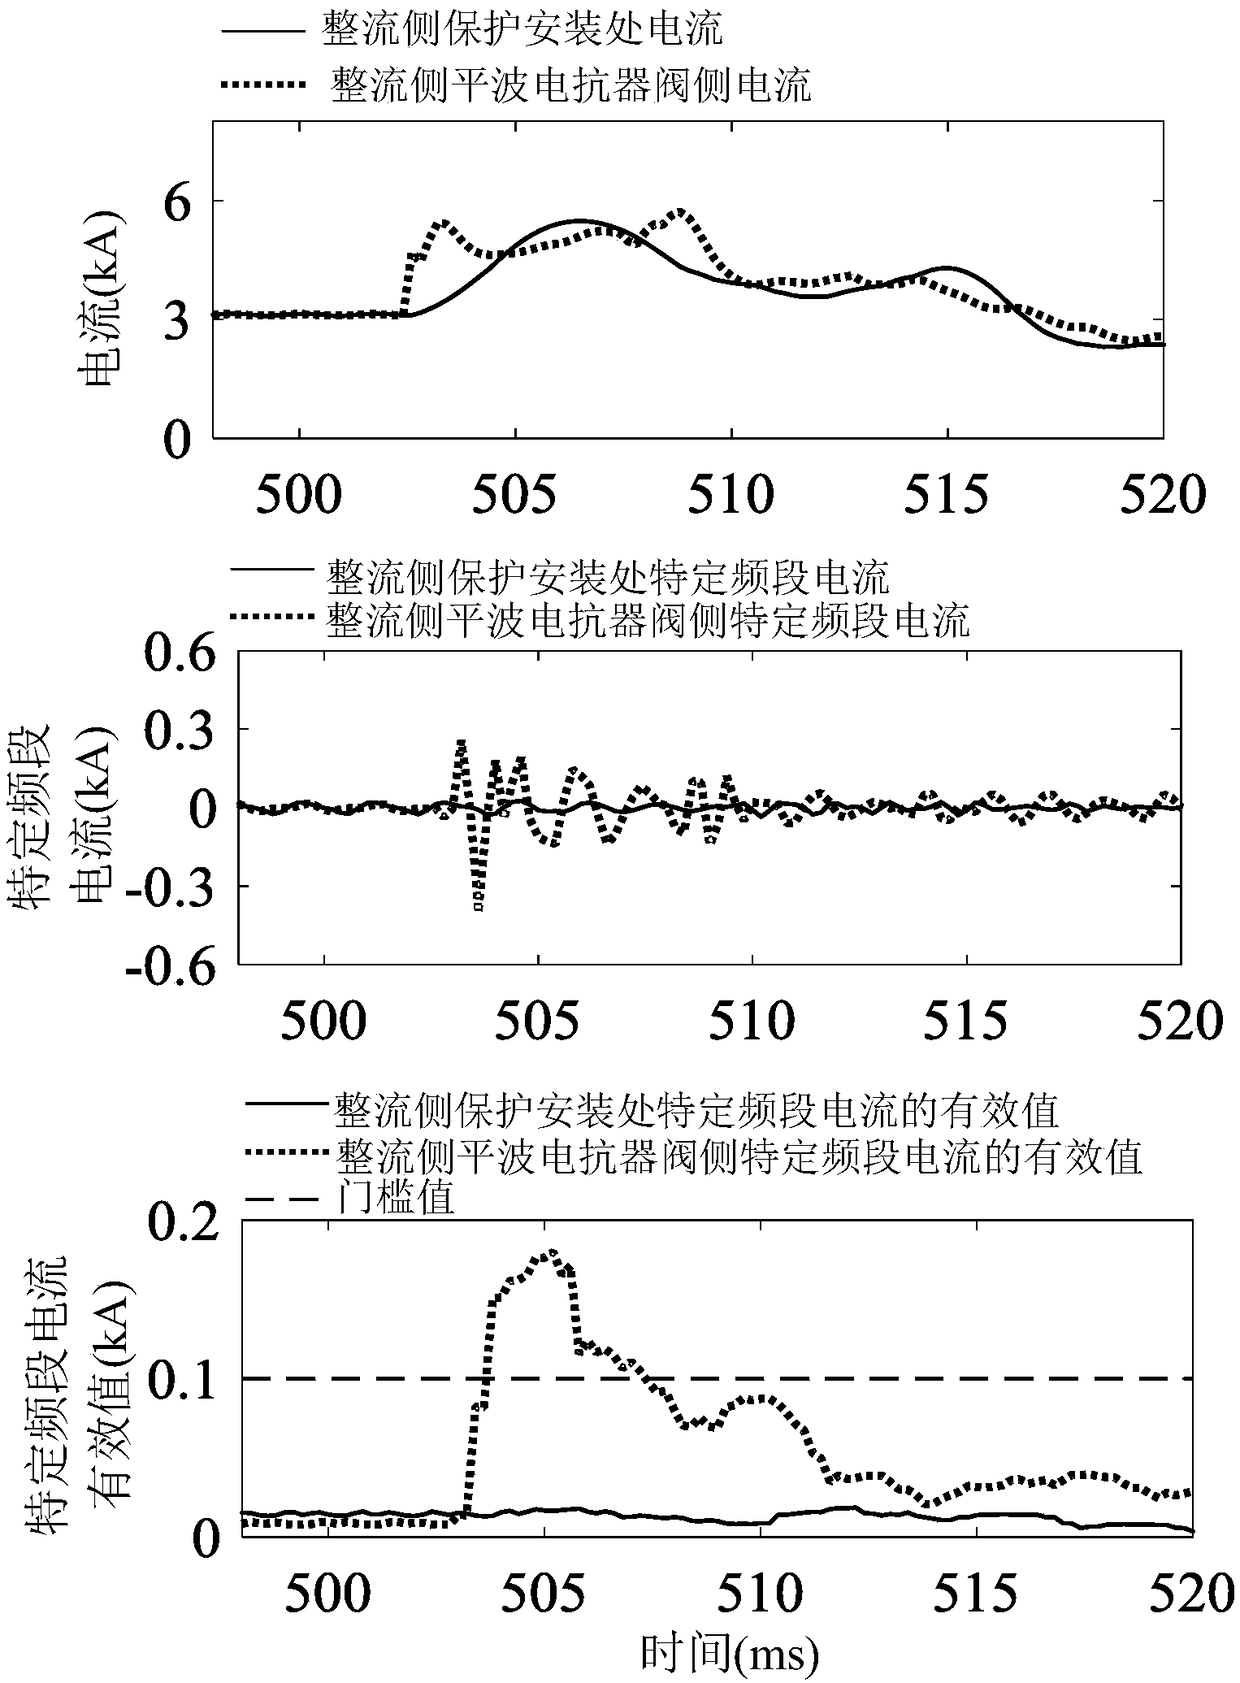 Ultrahigh-voltage DC line protection method based on specific frequency band current